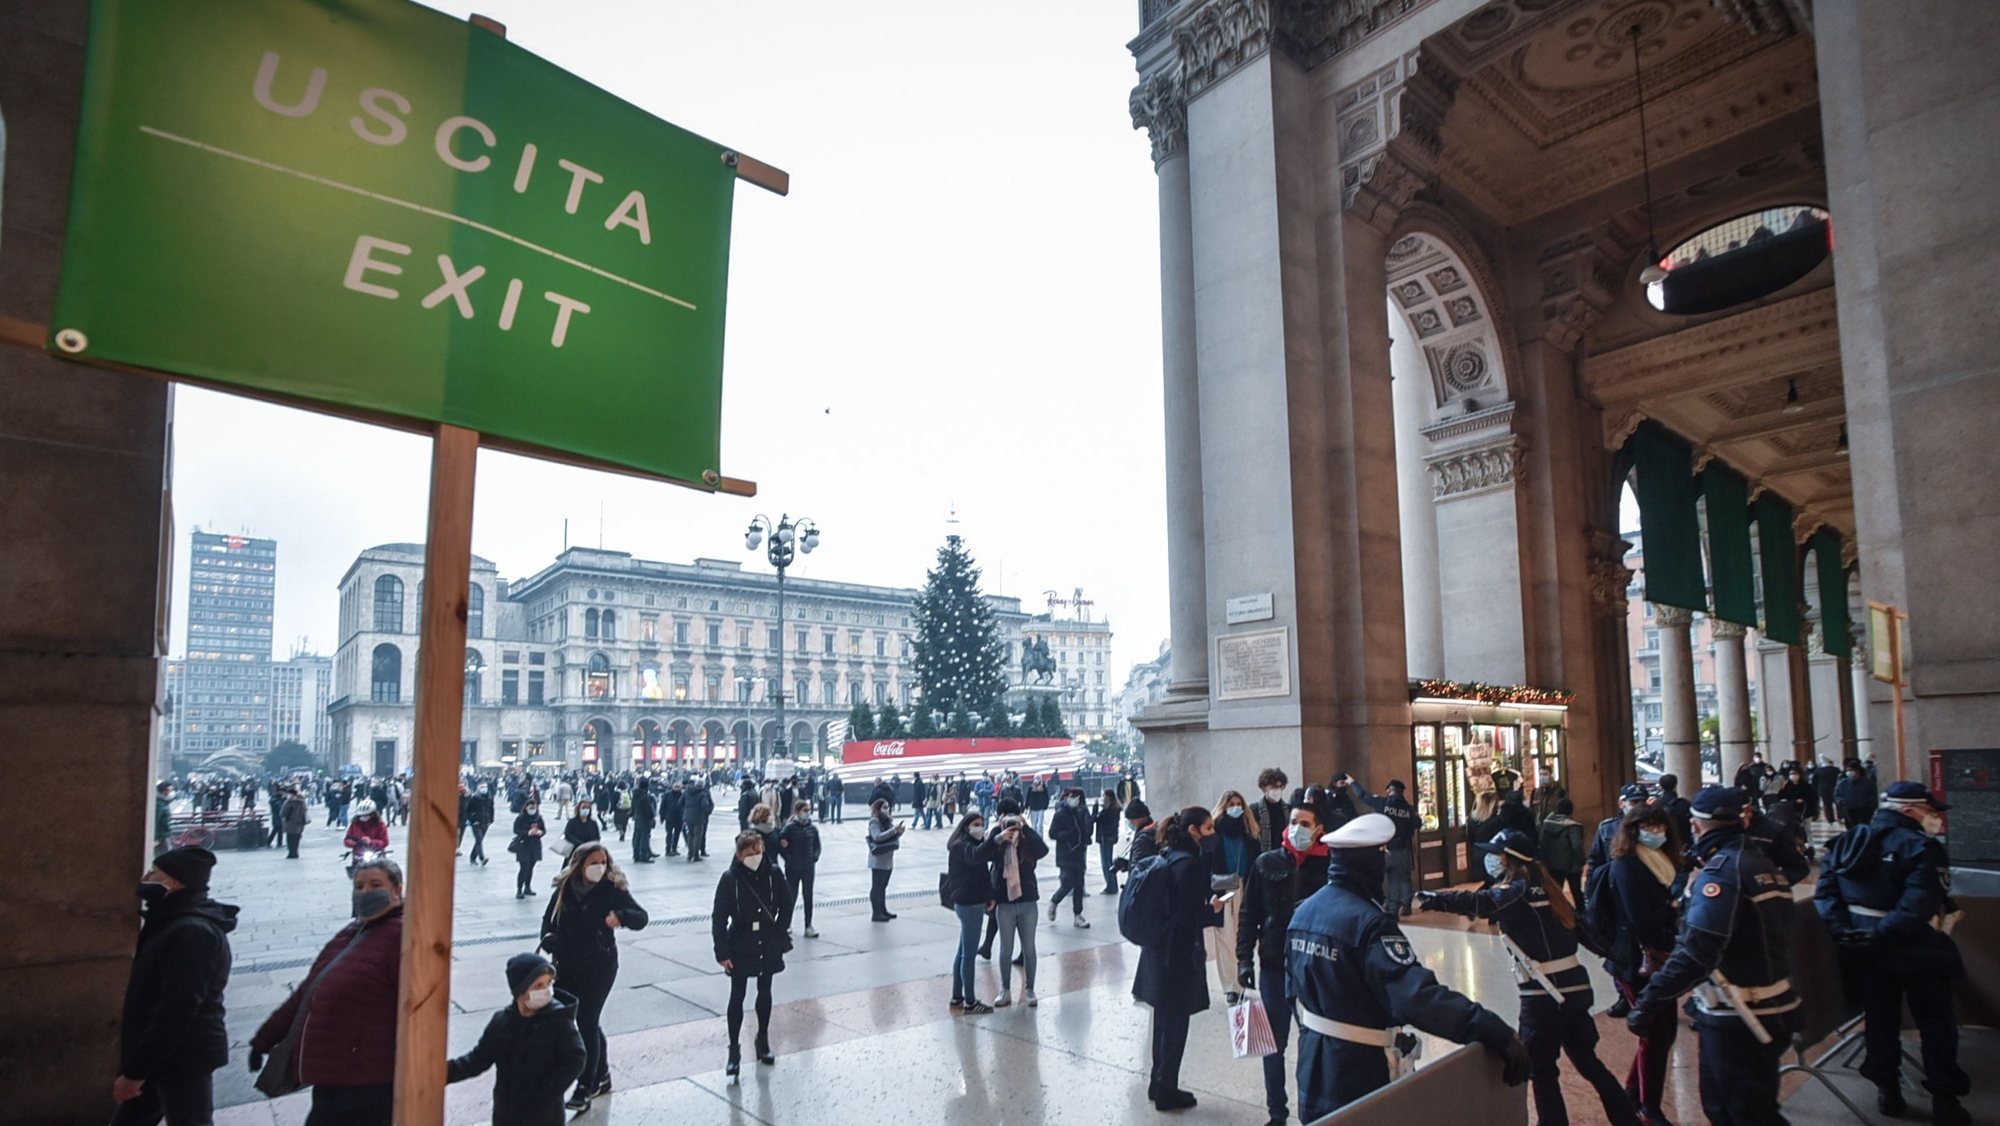 epa08892304 Barriers and officers of the Local Police regulate the influx of visitors to avoid crowds at the entrance to Piazza Duomo of the Vittorio Emanuele Gallery, in Milan, Italy, 18 December 2020. Italian Premier Giuseppe Conte&#039;s government looks set to approve restrictions that will put Italy into some form of a lockdown over the Christmas holidays to stop social contact during the festive season feeding a third wave of COVID-19 contagion in the country.  EPA/MATTEO CORNER